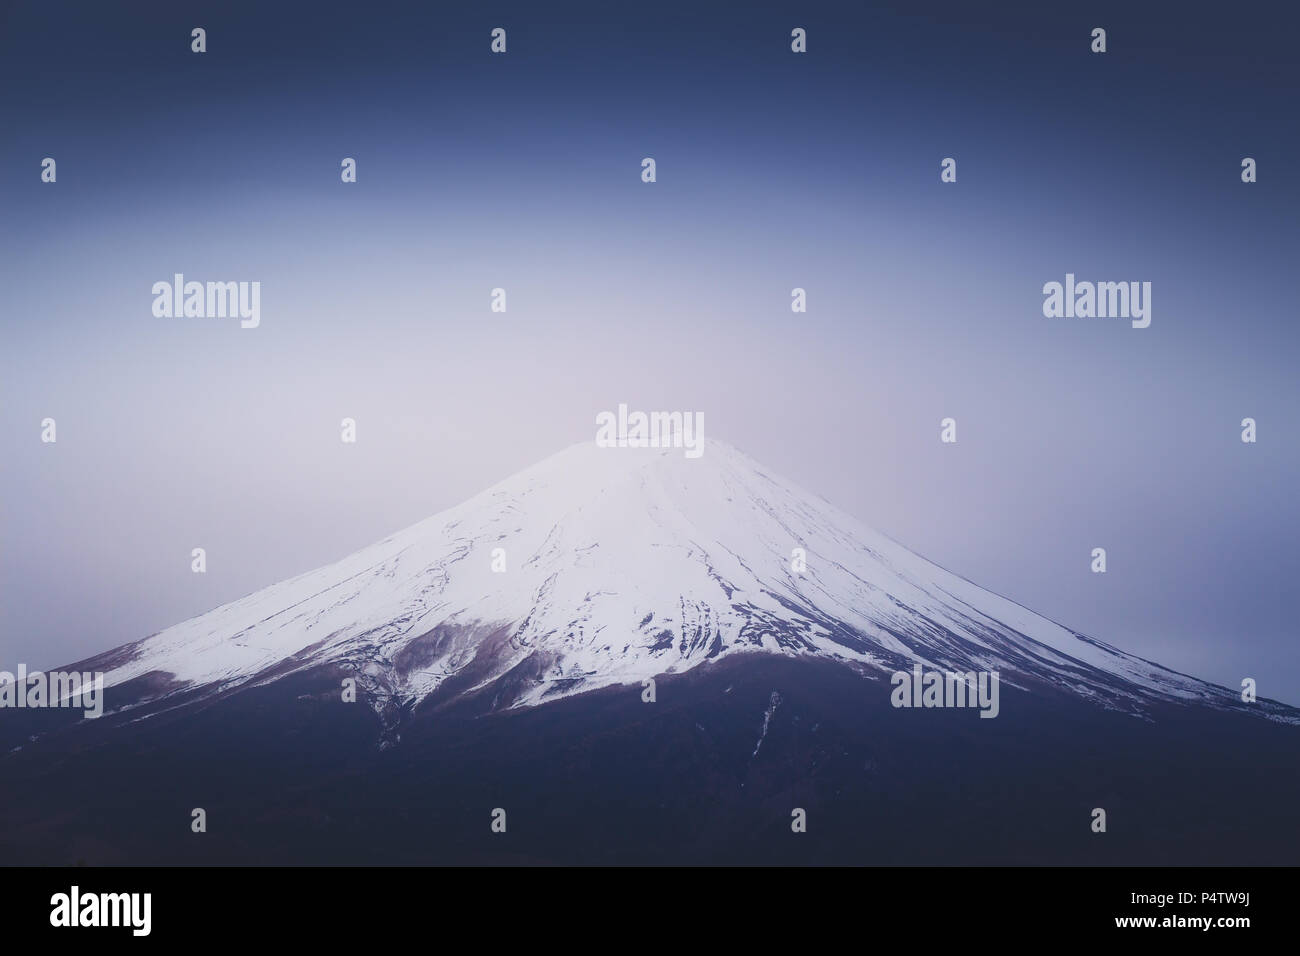 Mount Fuji with Abstract Clouds Stock Photo